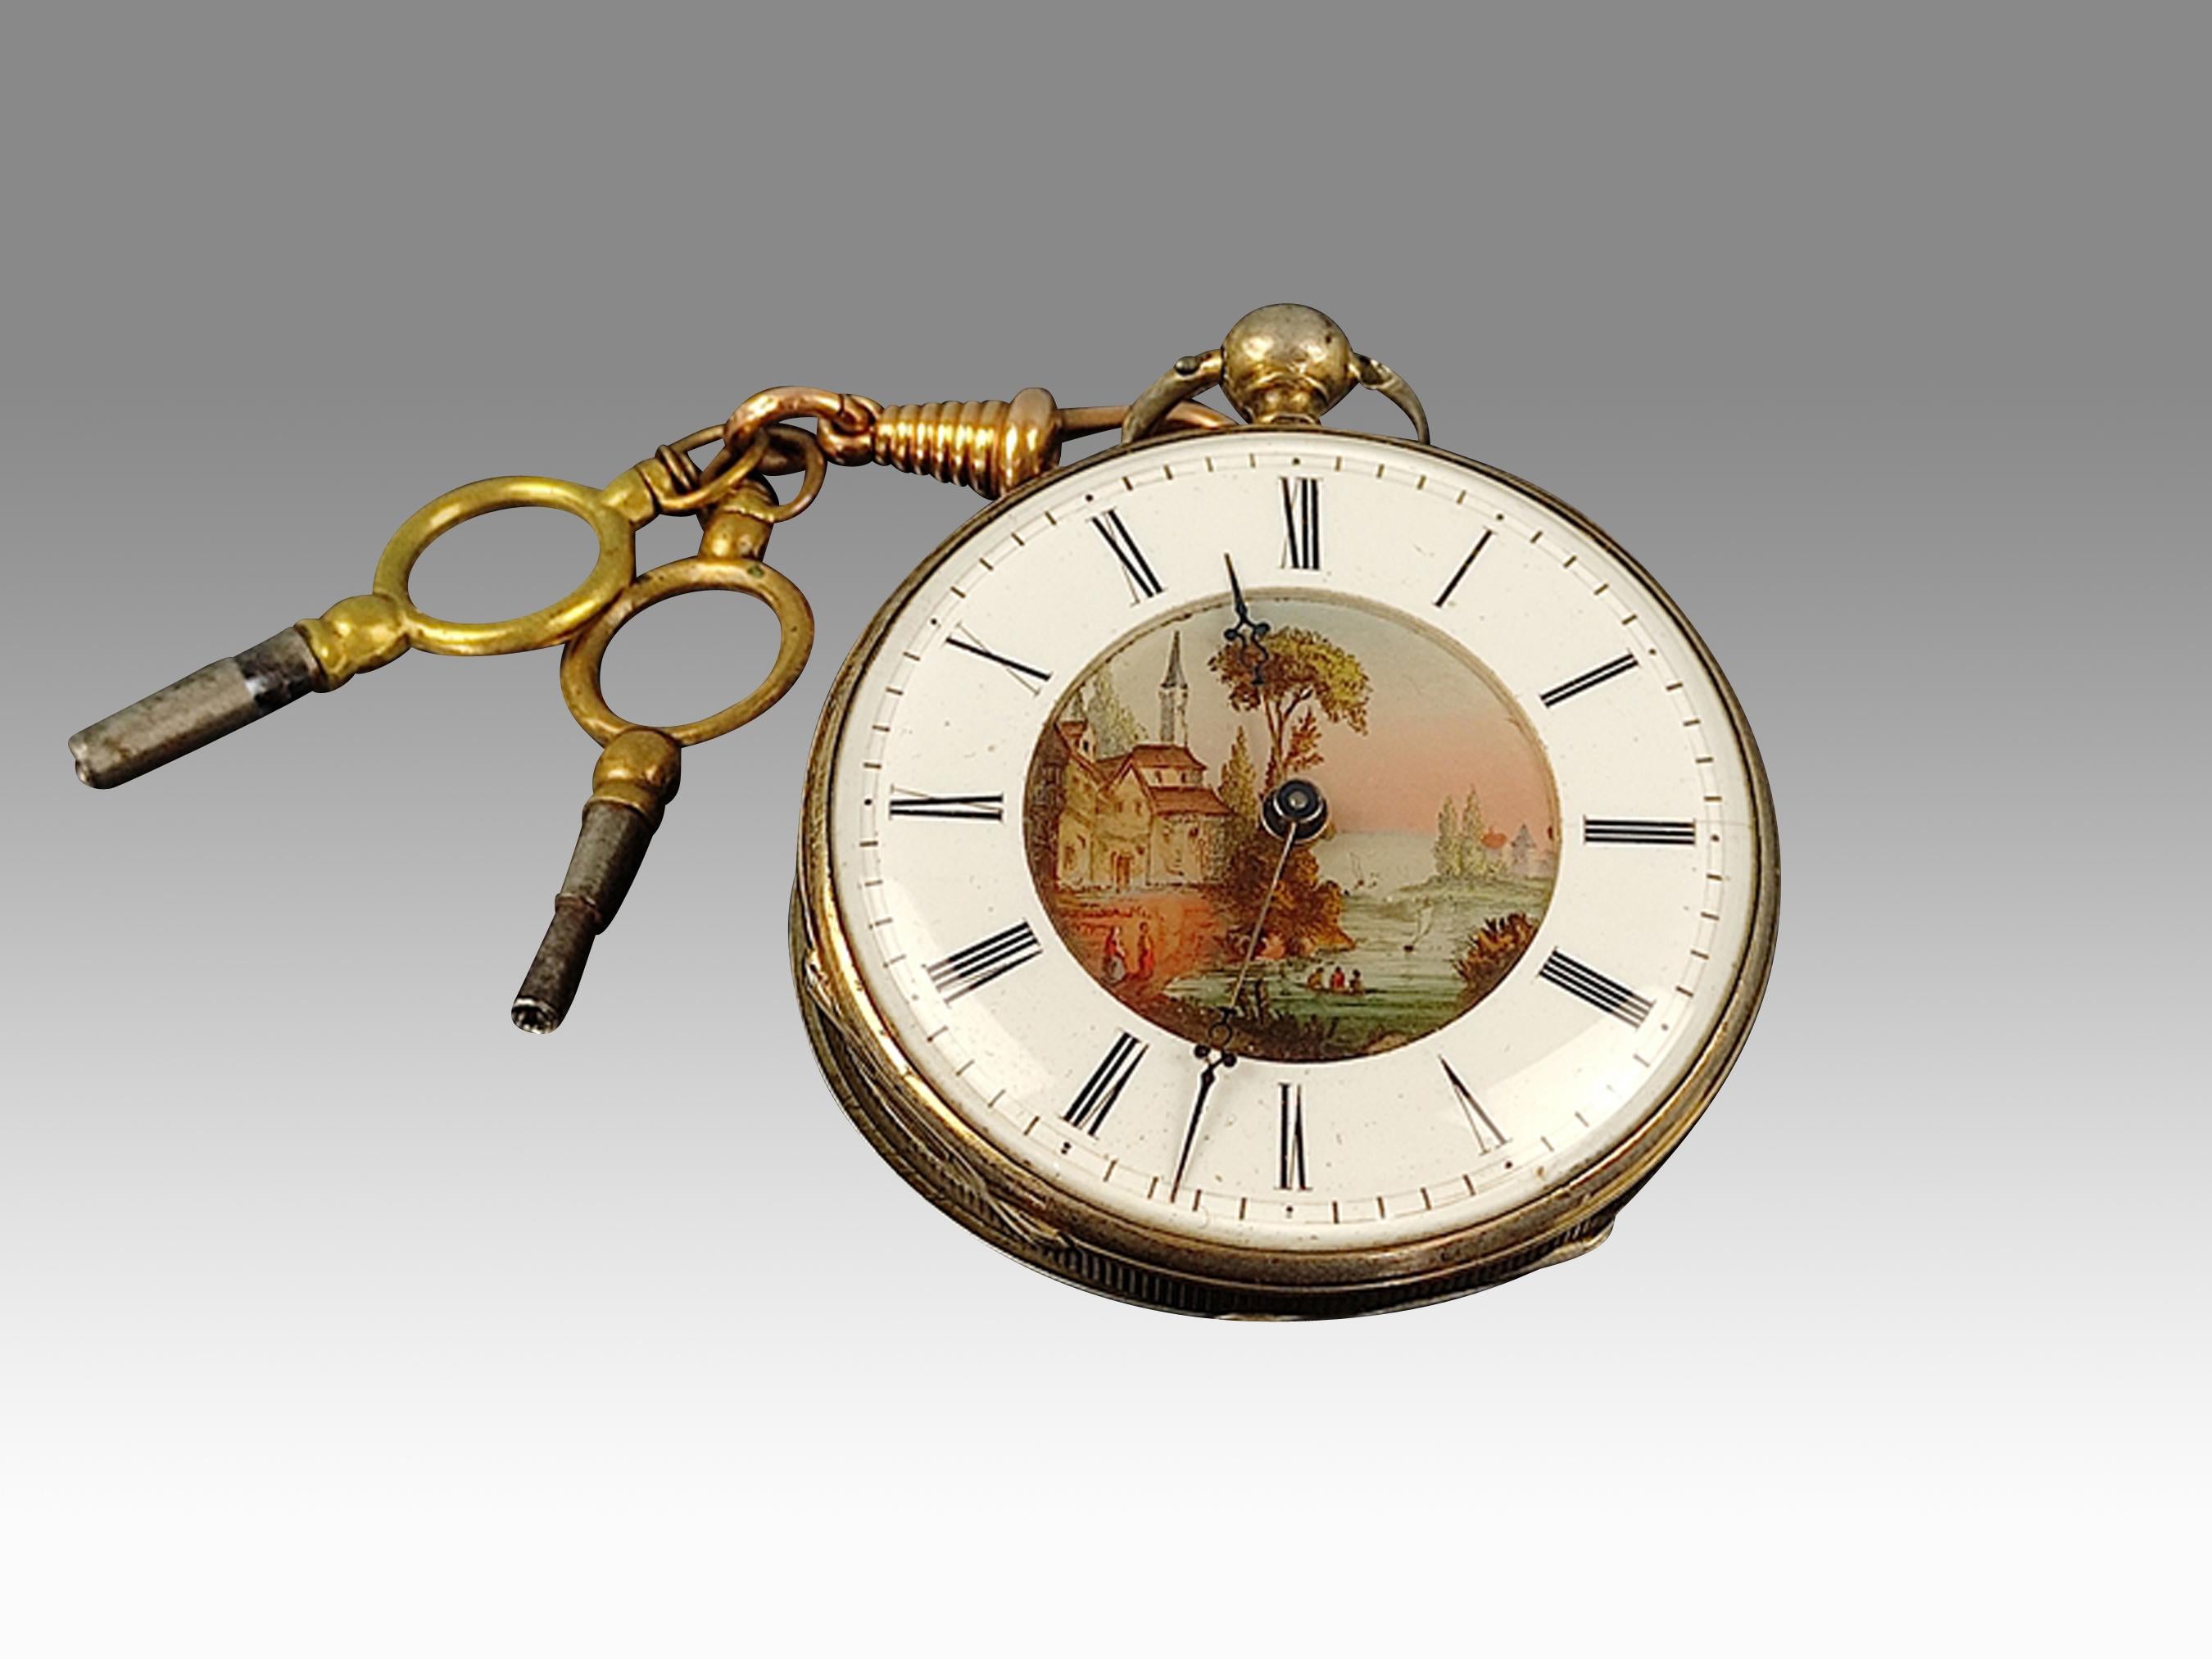 Rare Antique Pocket Key Watch French 1800s with Painted Enamel Dial For Sale 4